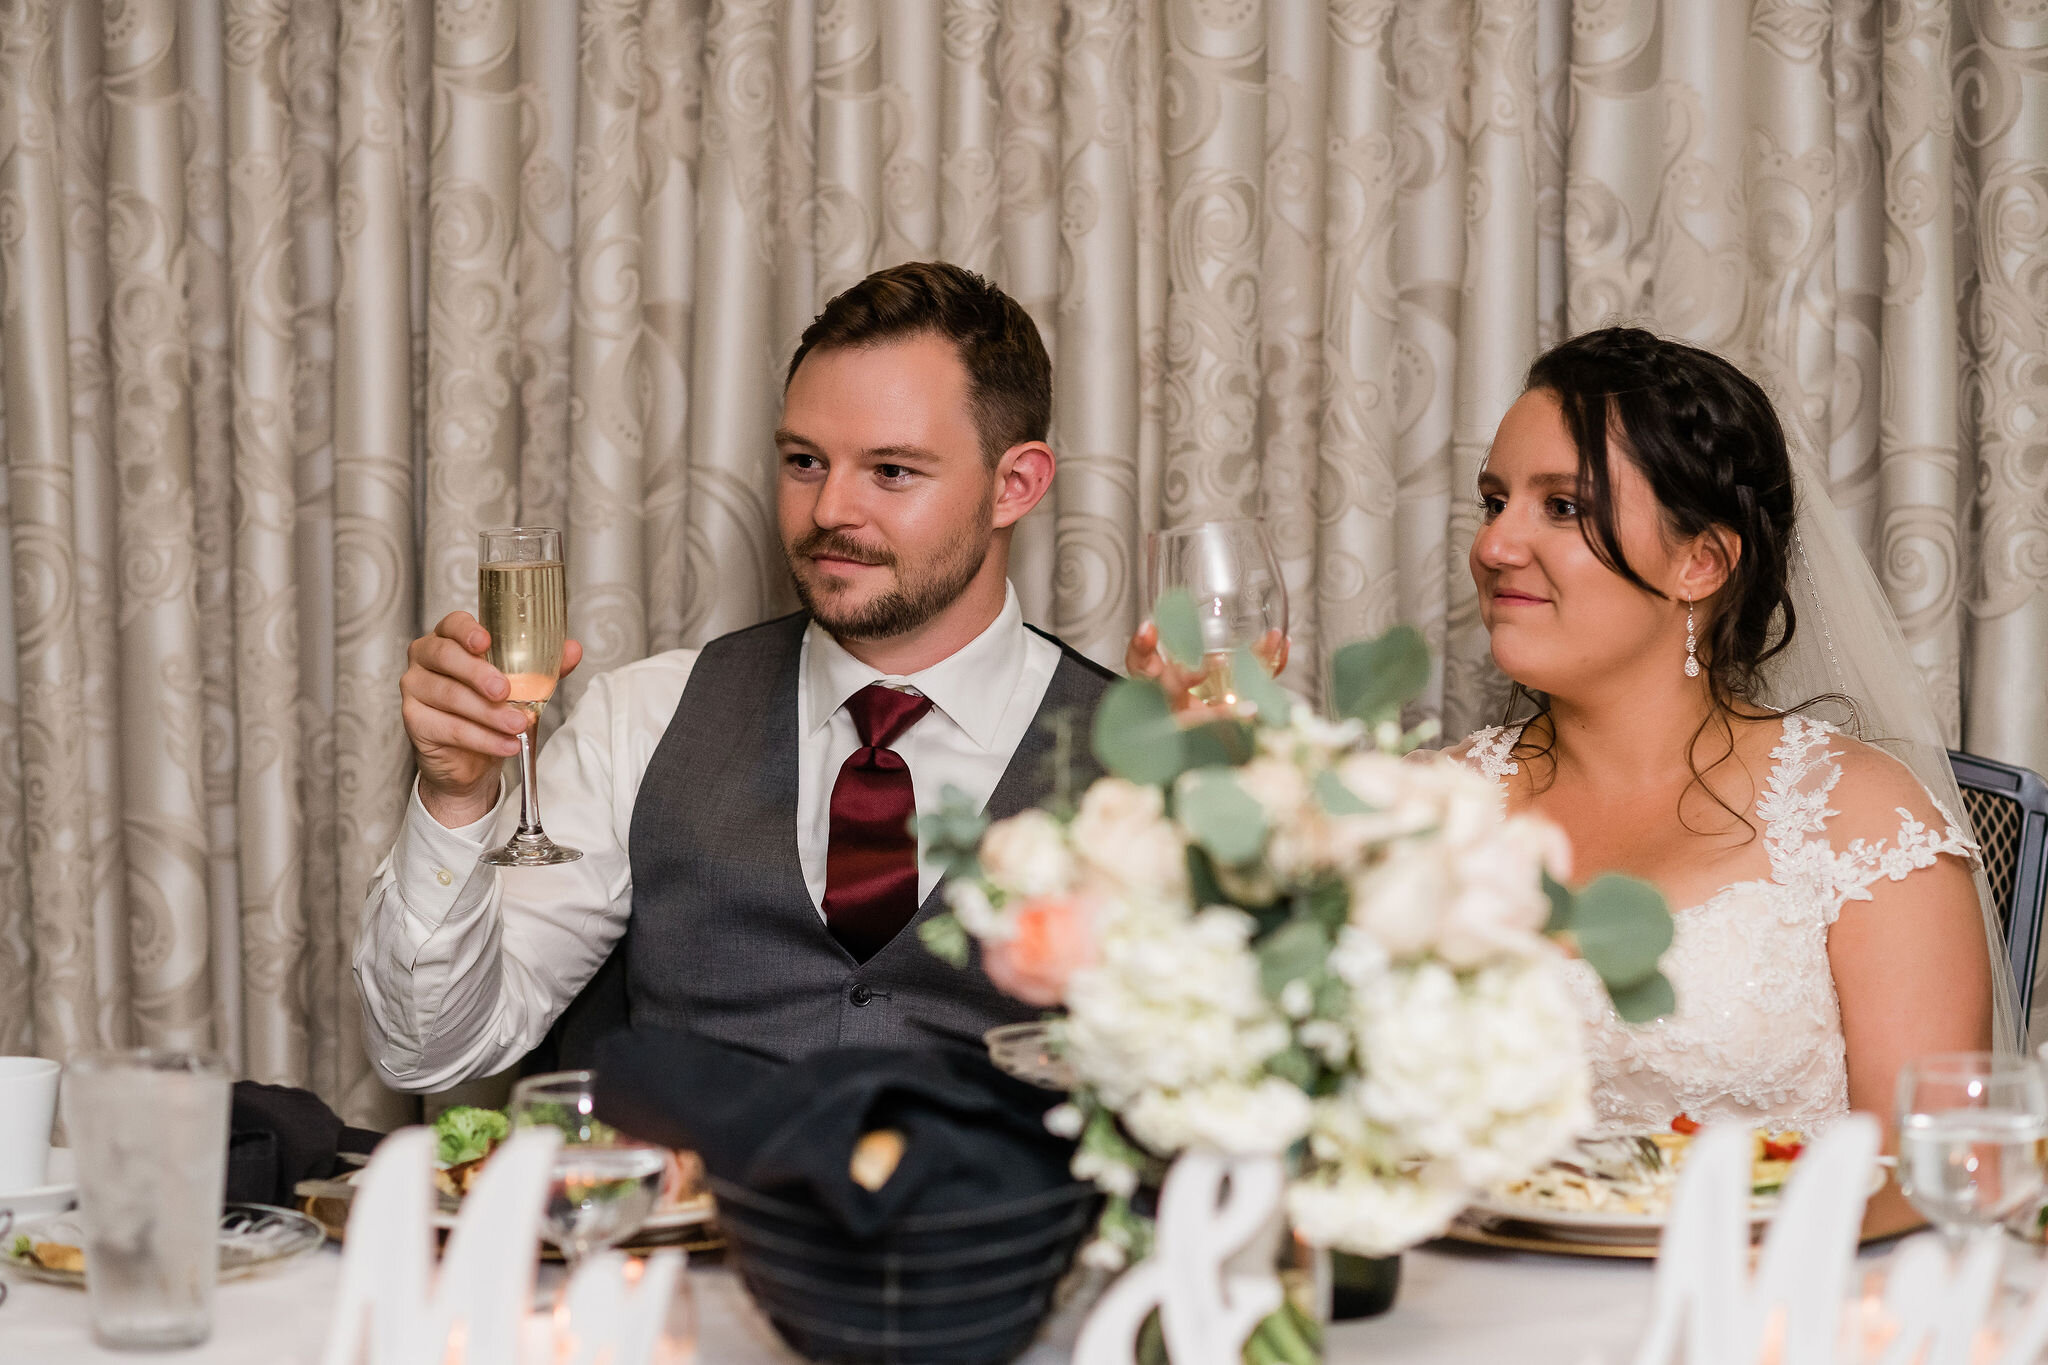 Bride and groom raising their glasses for a toast